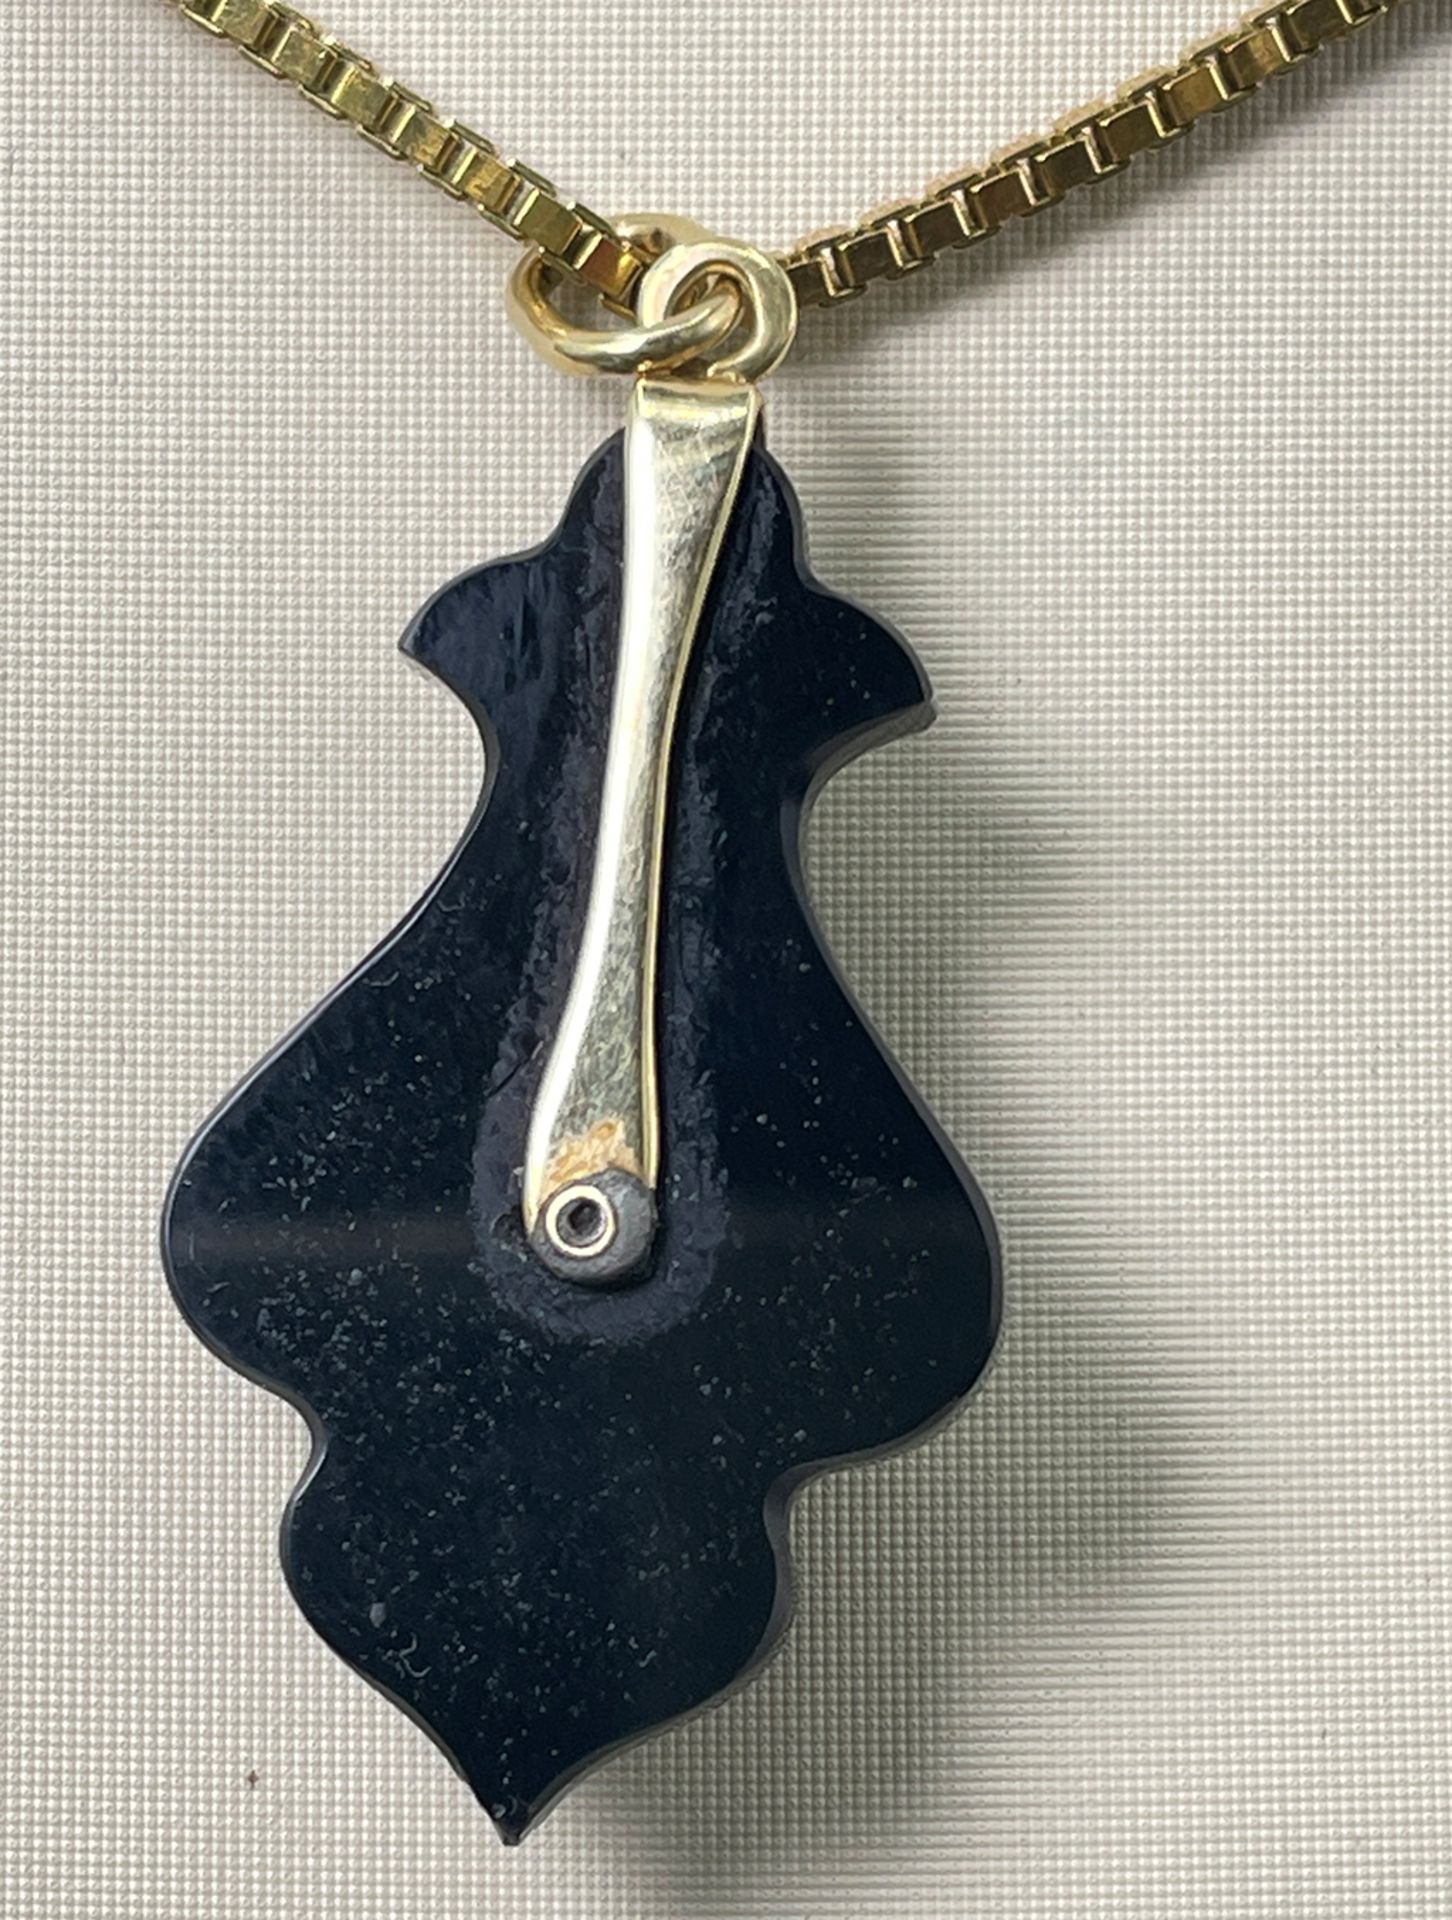 Antique onyx pendant, with 14K gold insect, pearls and diamonds - Image 5 of 5